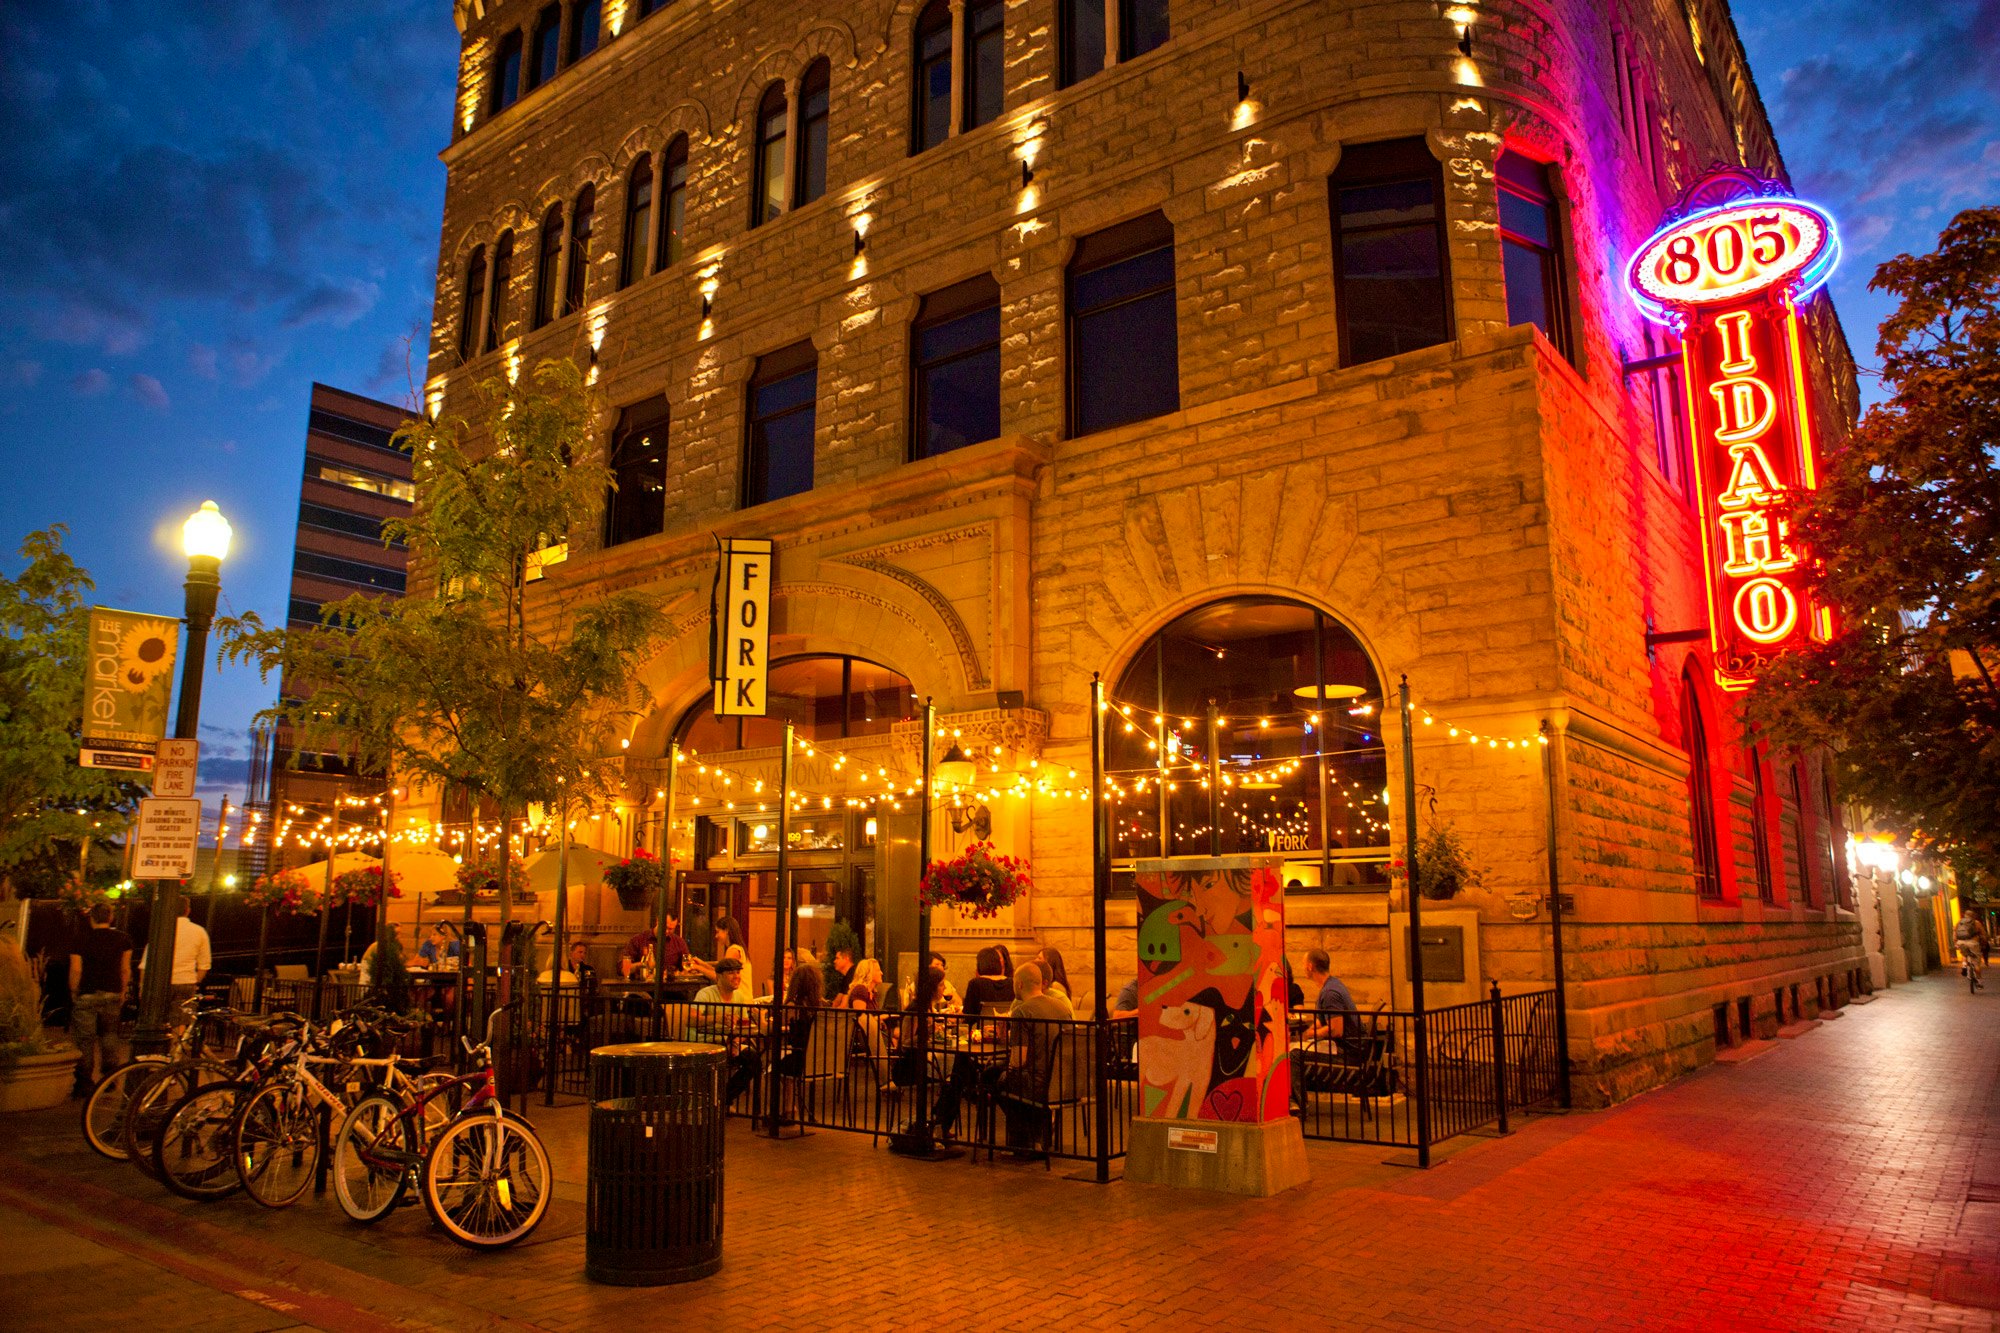 Downtown Boise is home to award-winning restaurants, wineries and craft breweries © Boise Convention & Visitors Bureau